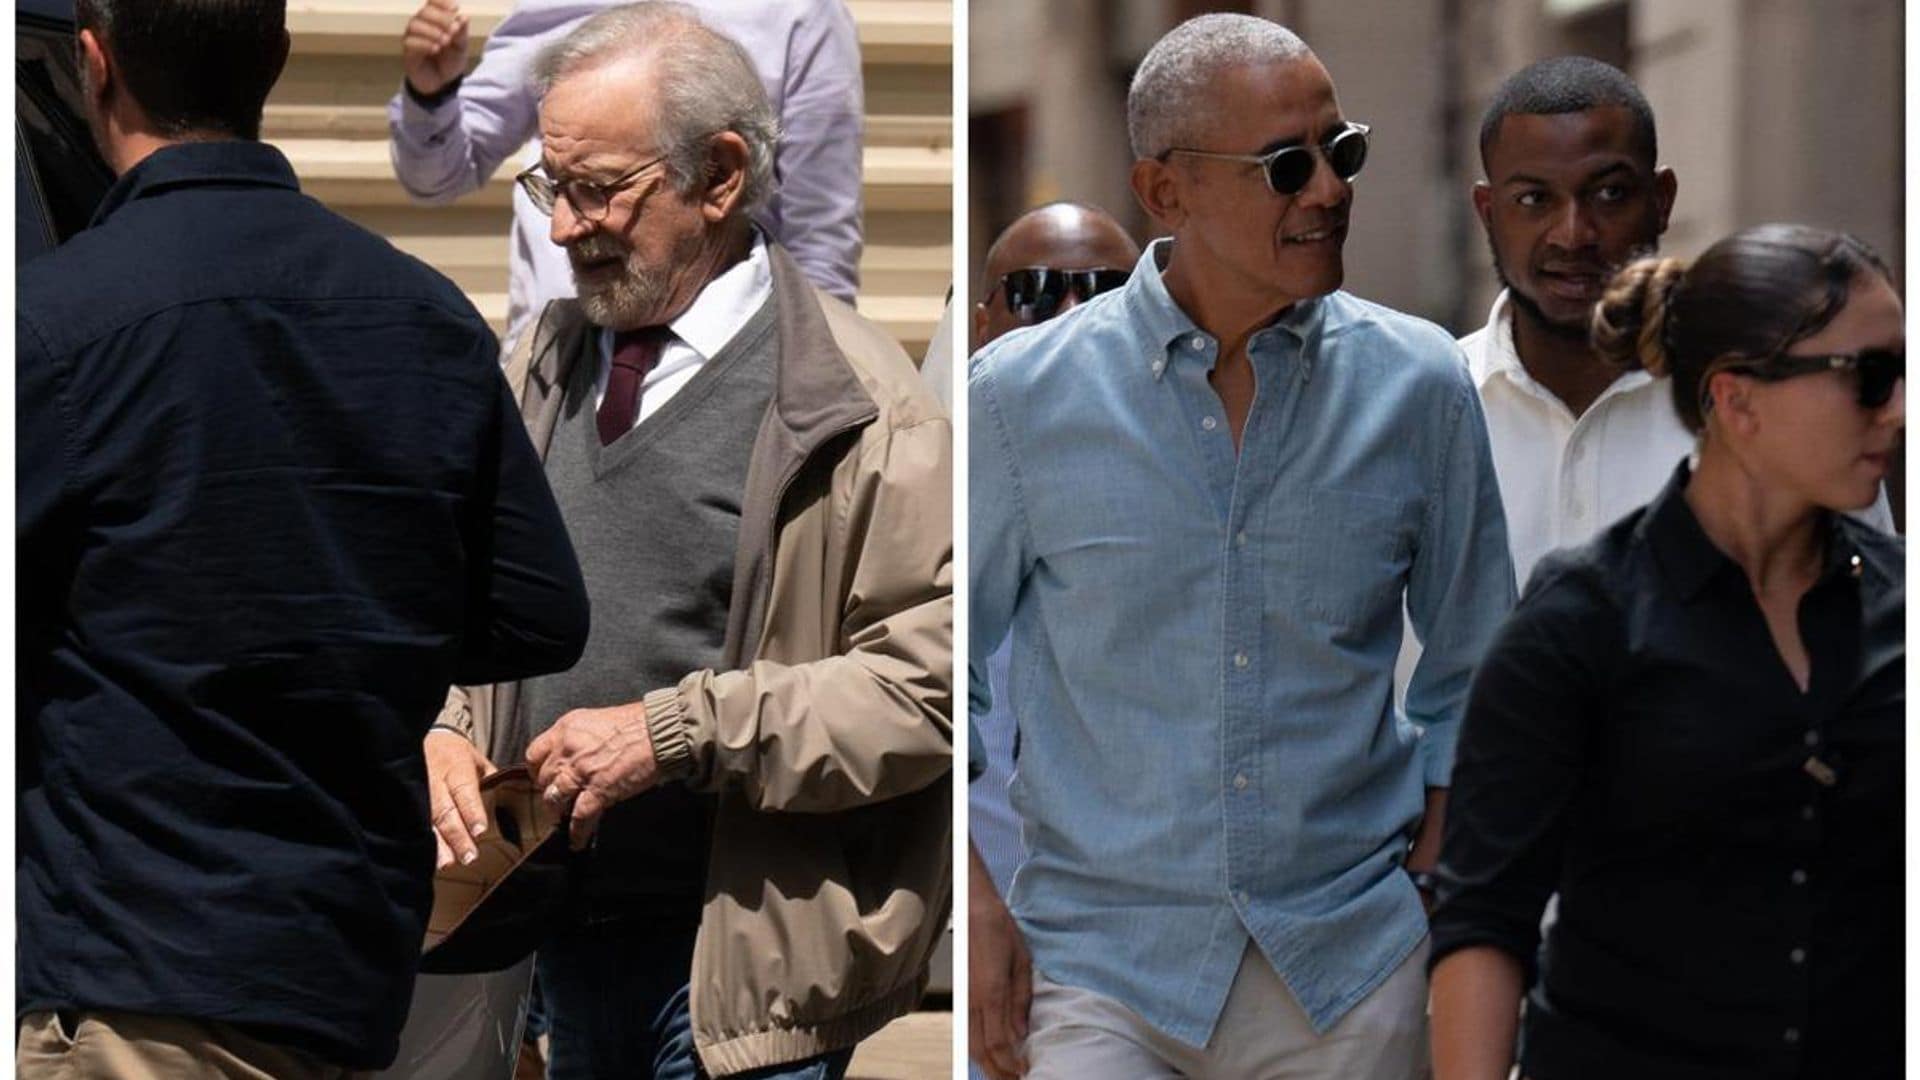 Barack and Michelle Obama enjoy dinner with Bruce Springsteen and Steven Spielberg